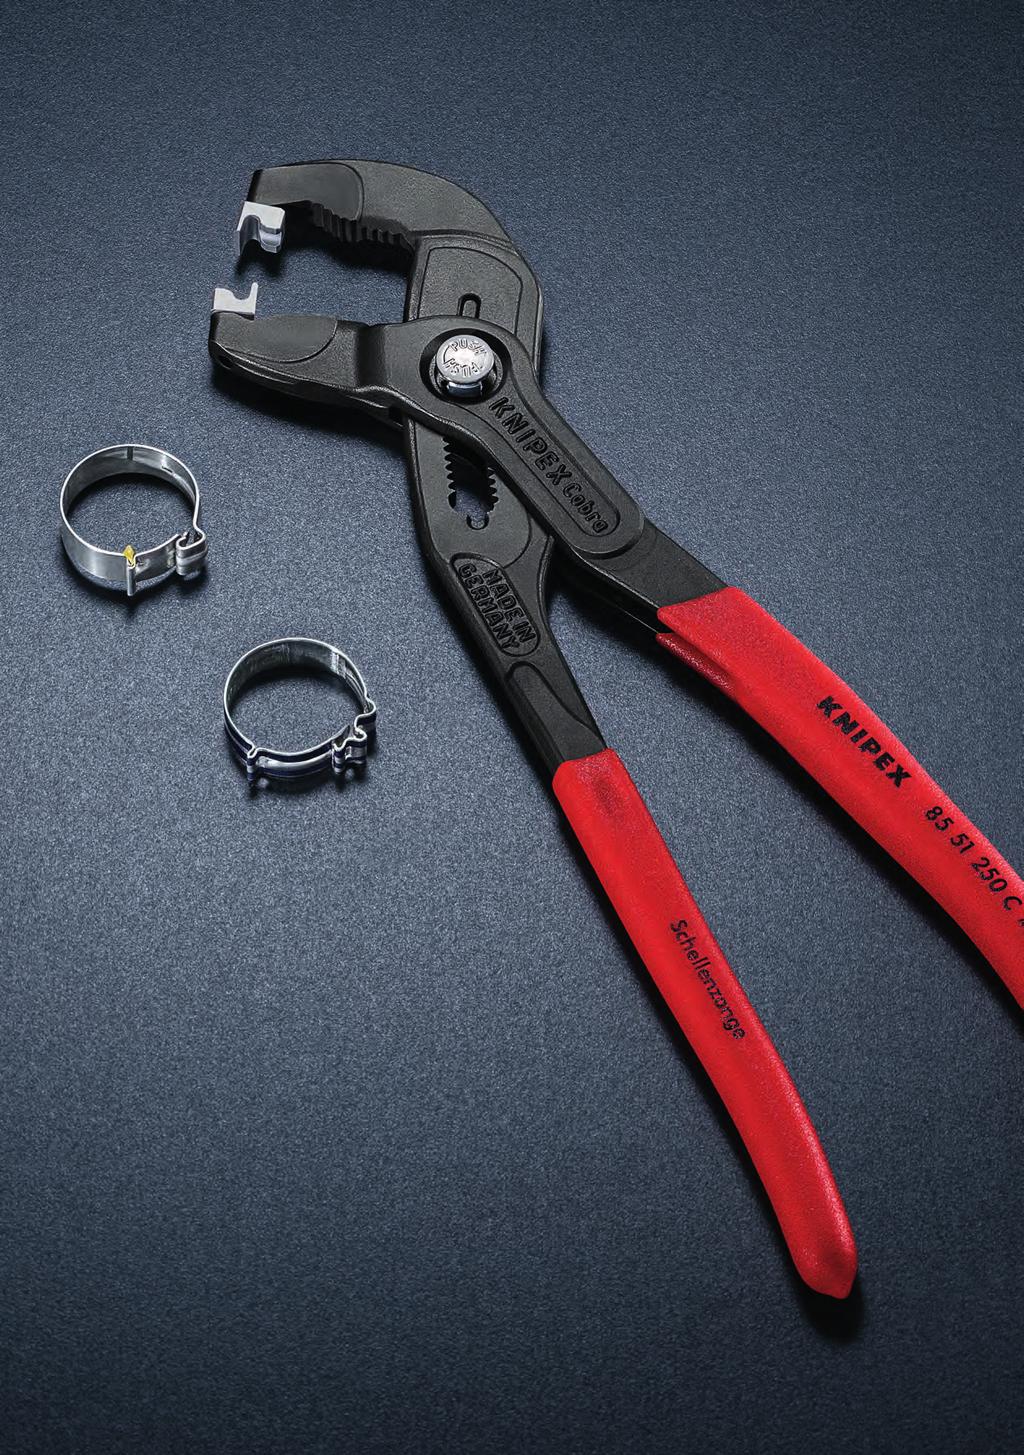 Hose Clamp Pliers To